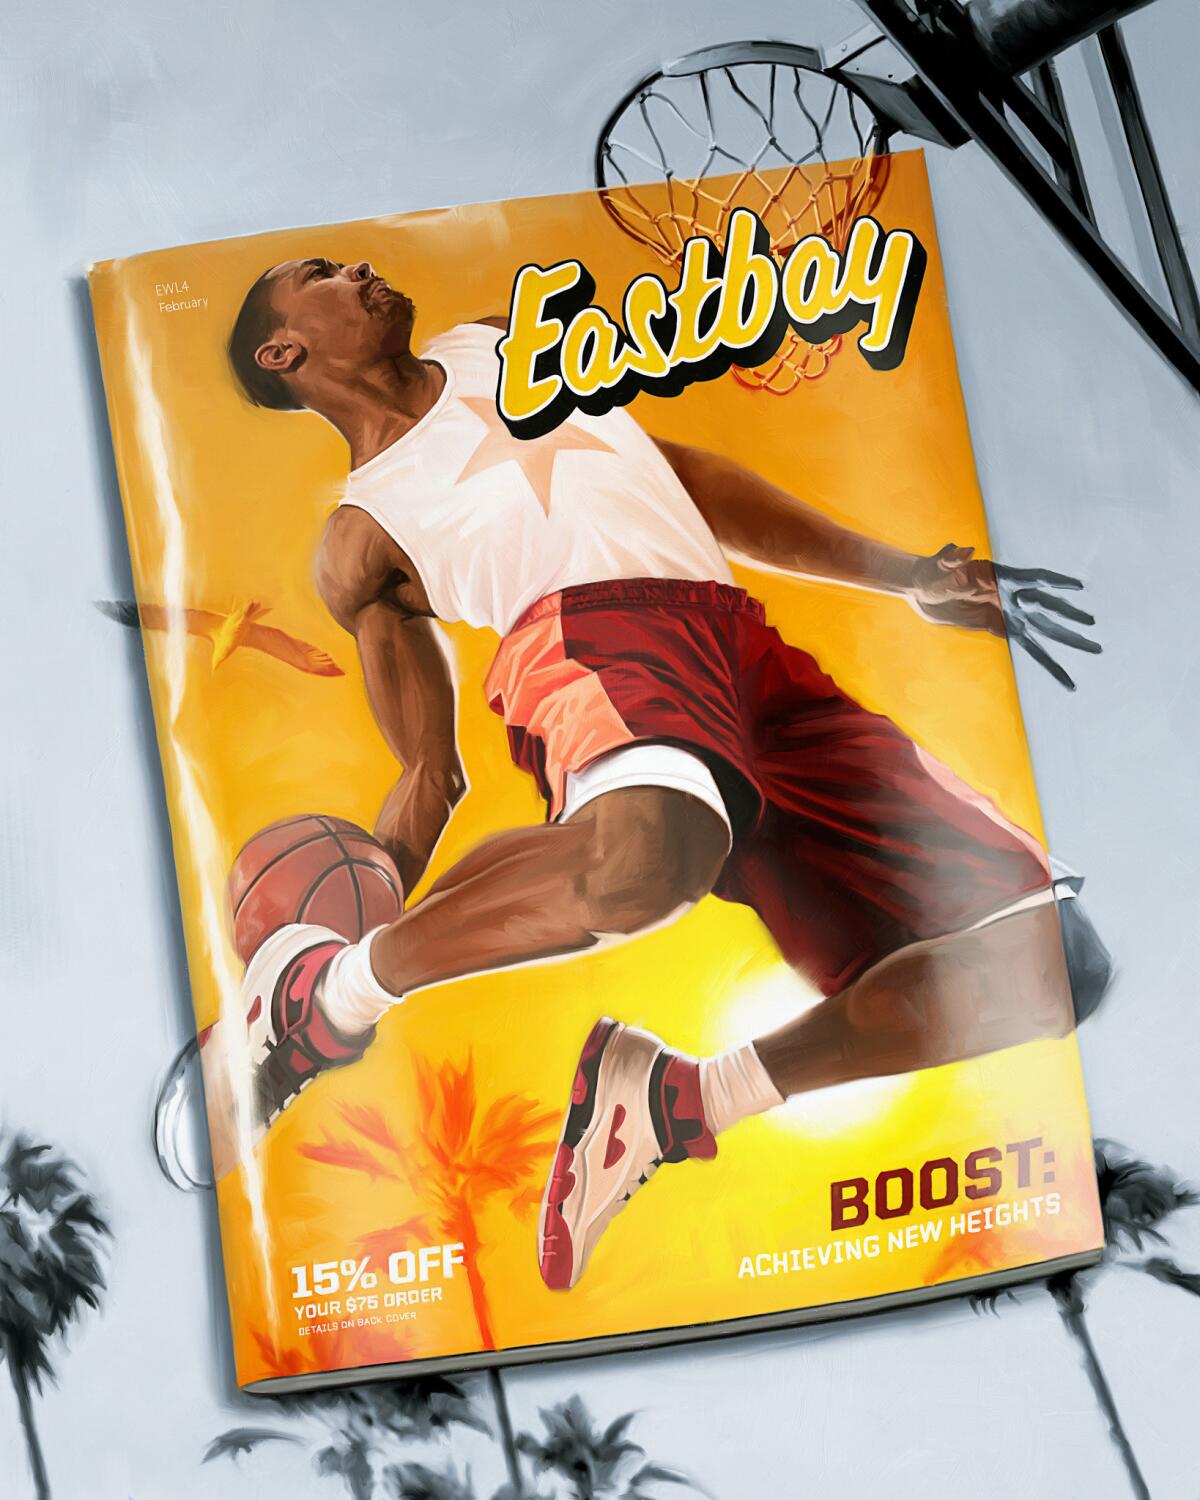 Eastbay catalog, shown in an illustration, was P.J. Tucker's fashion bible growing up, the Houston Rockets player says.